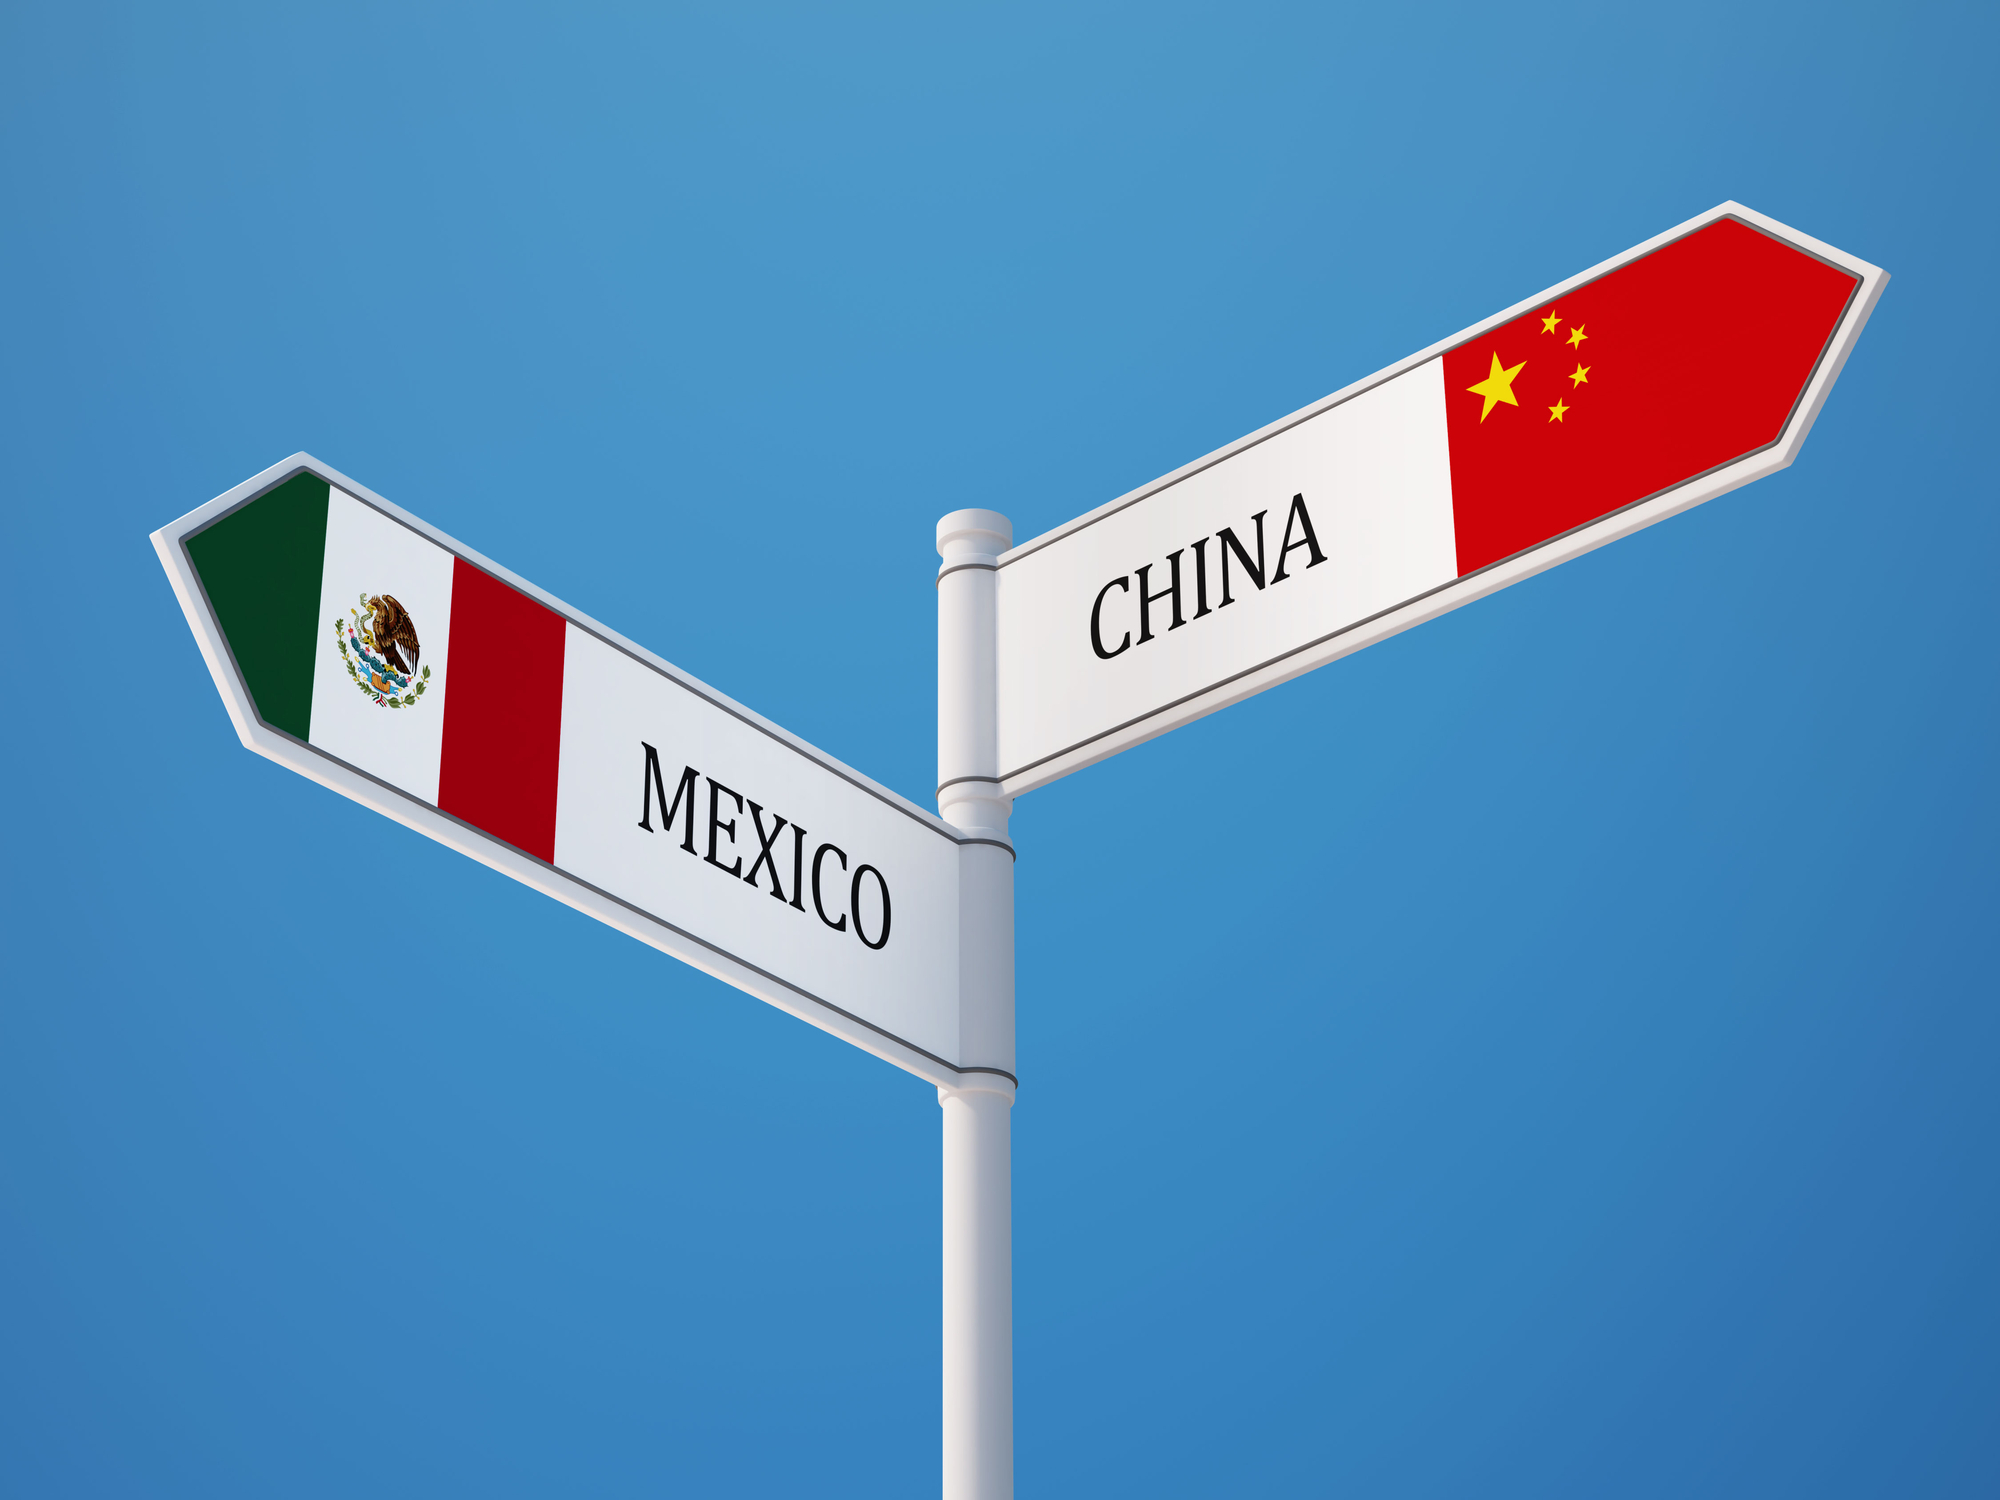 Troubled by China? Contemplate Mexico*